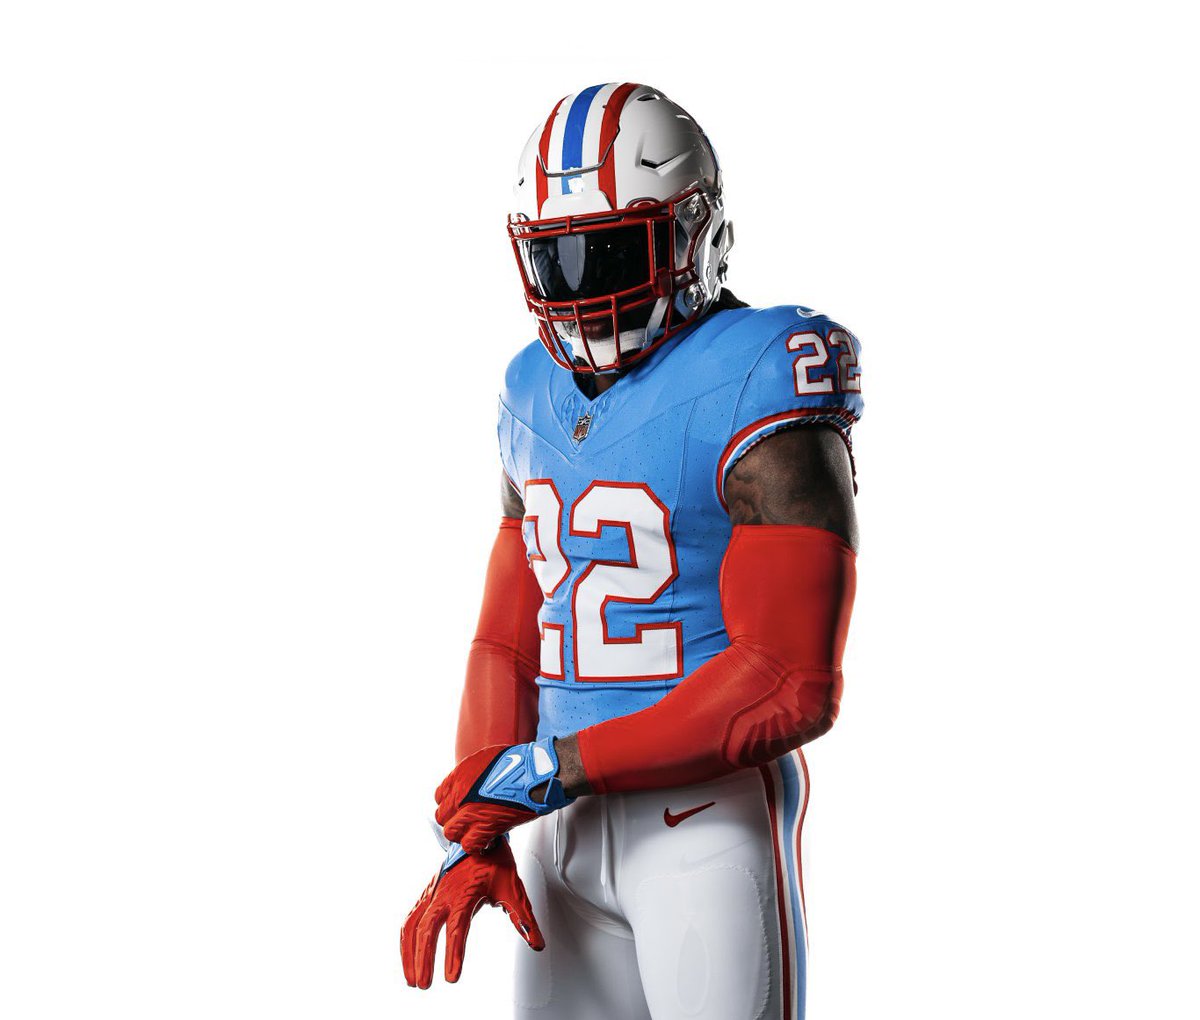 Wes on Broadway on X: Jim Wyatt predicts that when the #Titans role out  the throwback Oilers uniforms for the first time, it will be against the  Houston Texans! The Texans are